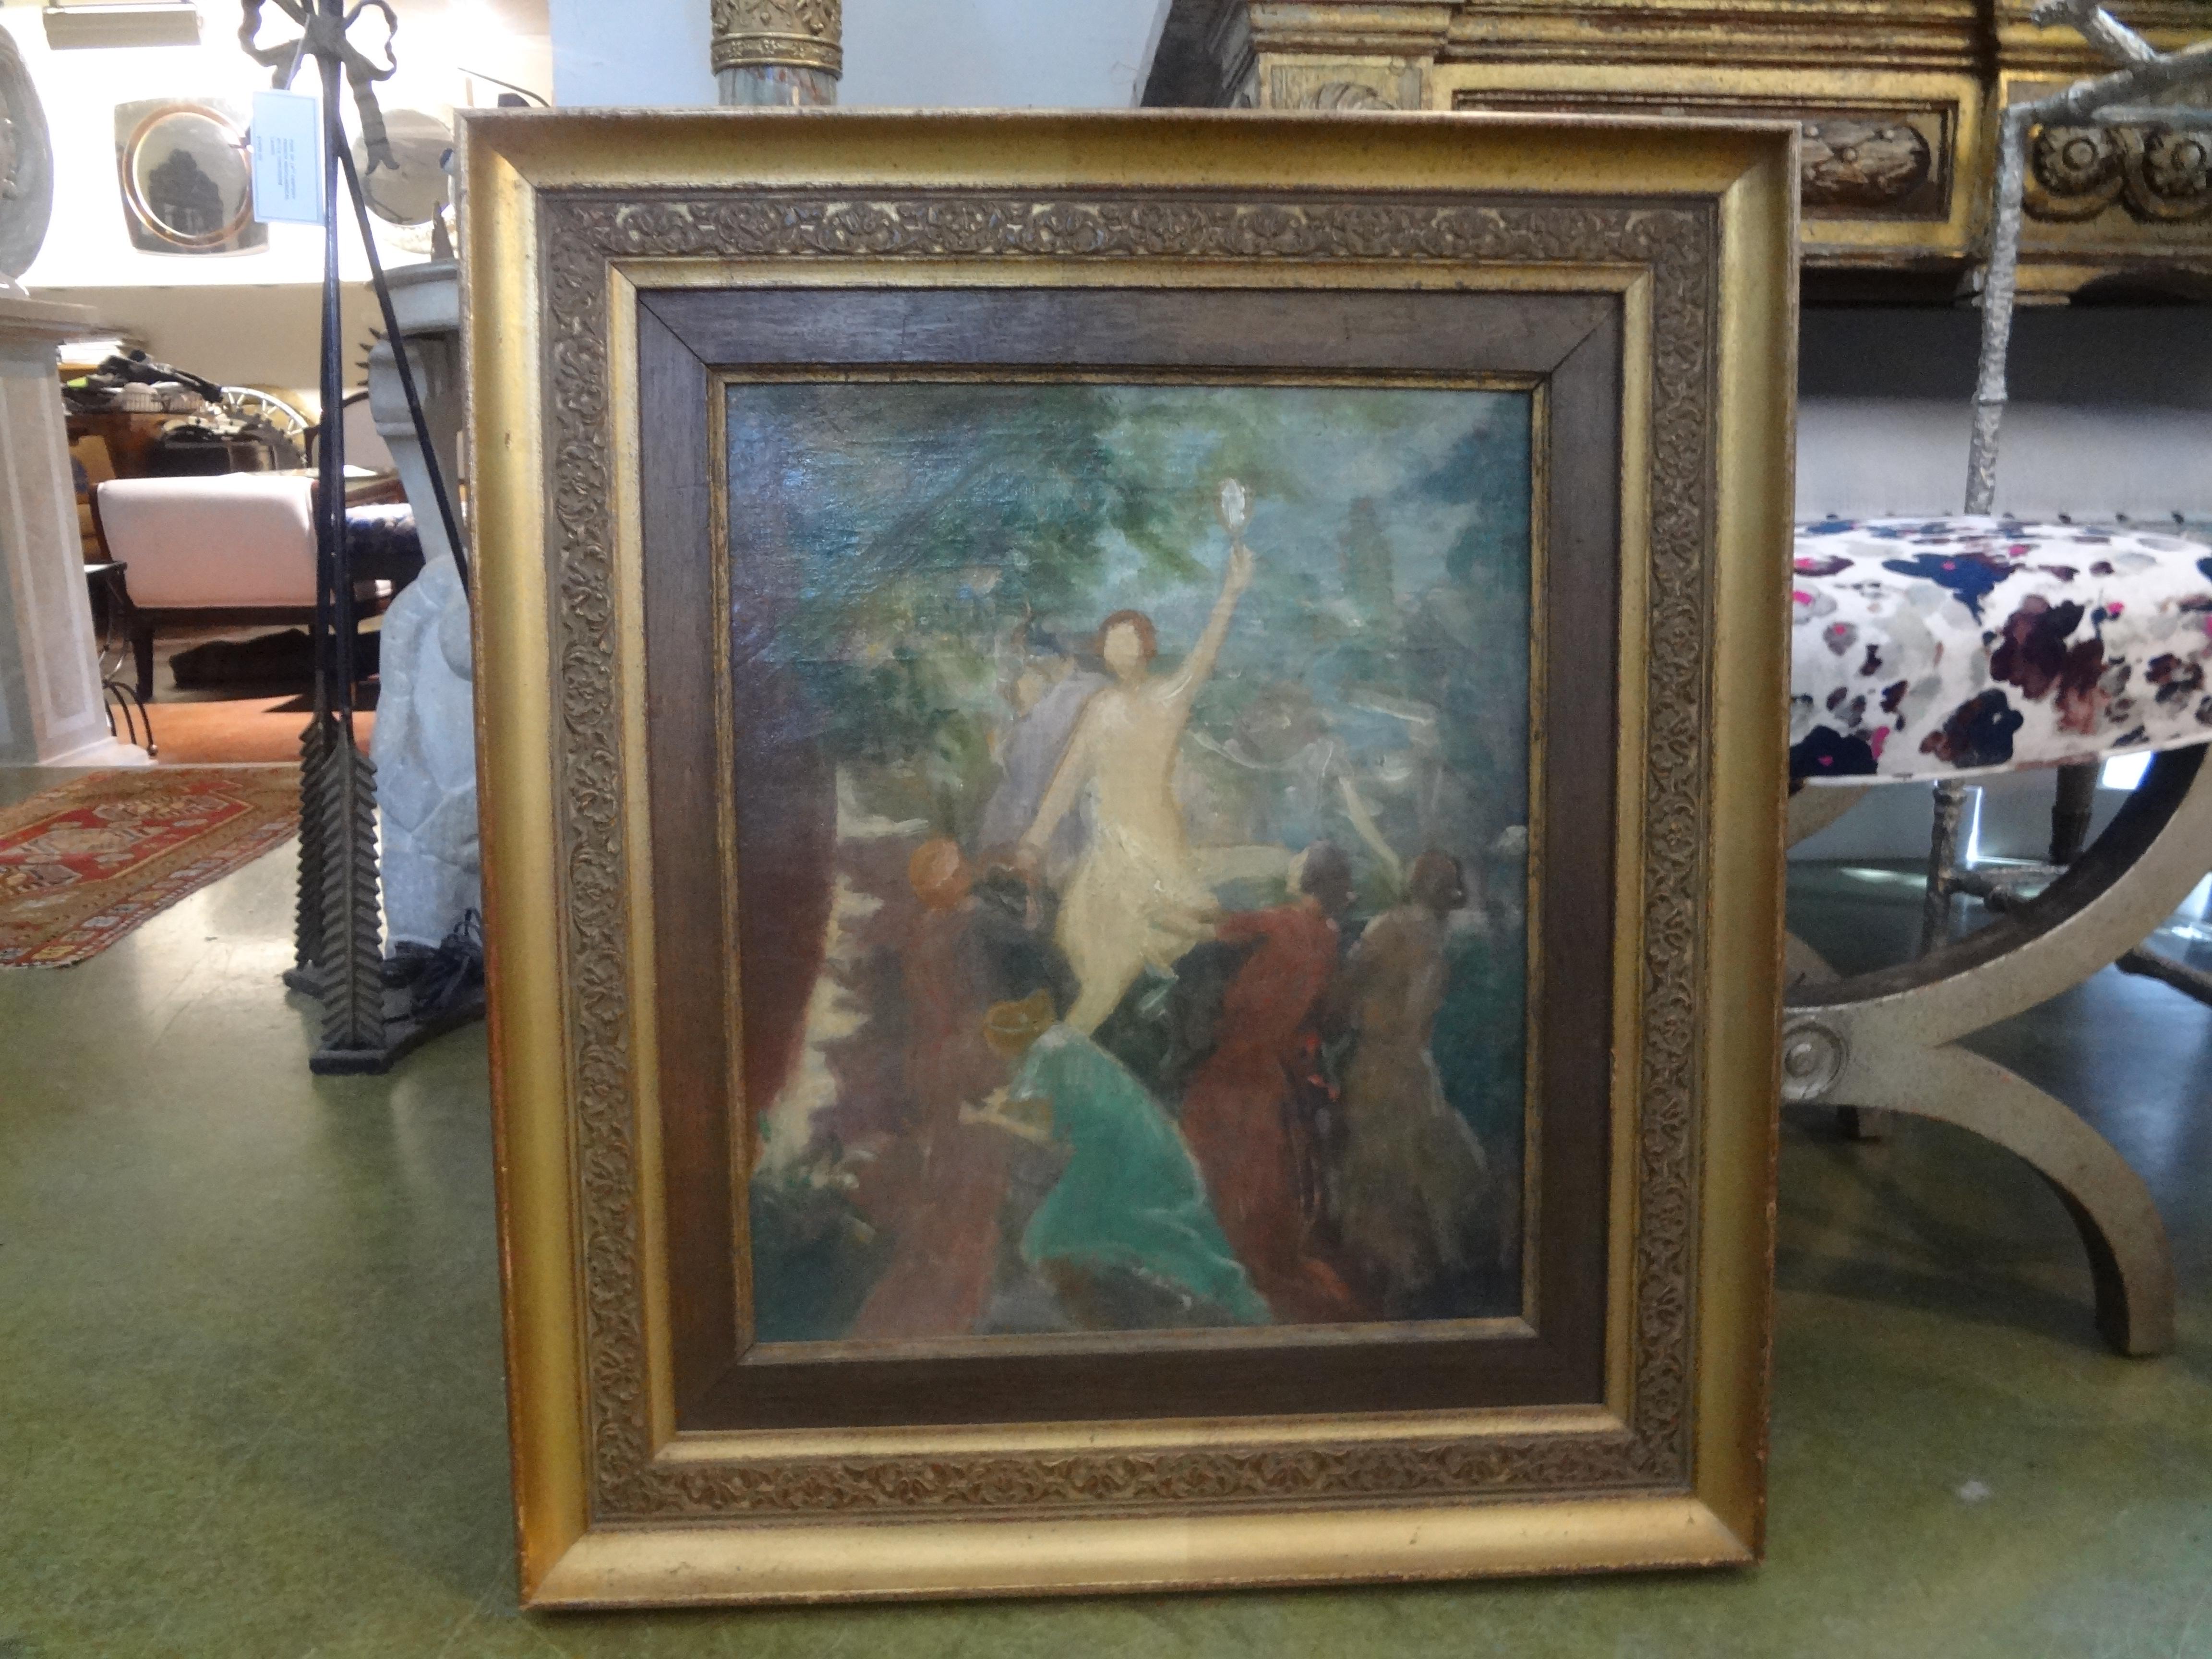 19th century French framed impressionist oil on canvas.
Stunning 19th century French framed impressionist oil on canvas. This beautiful French oil painting was executed in Paris in the last quarter of the 19th century. Although unsigned, it is